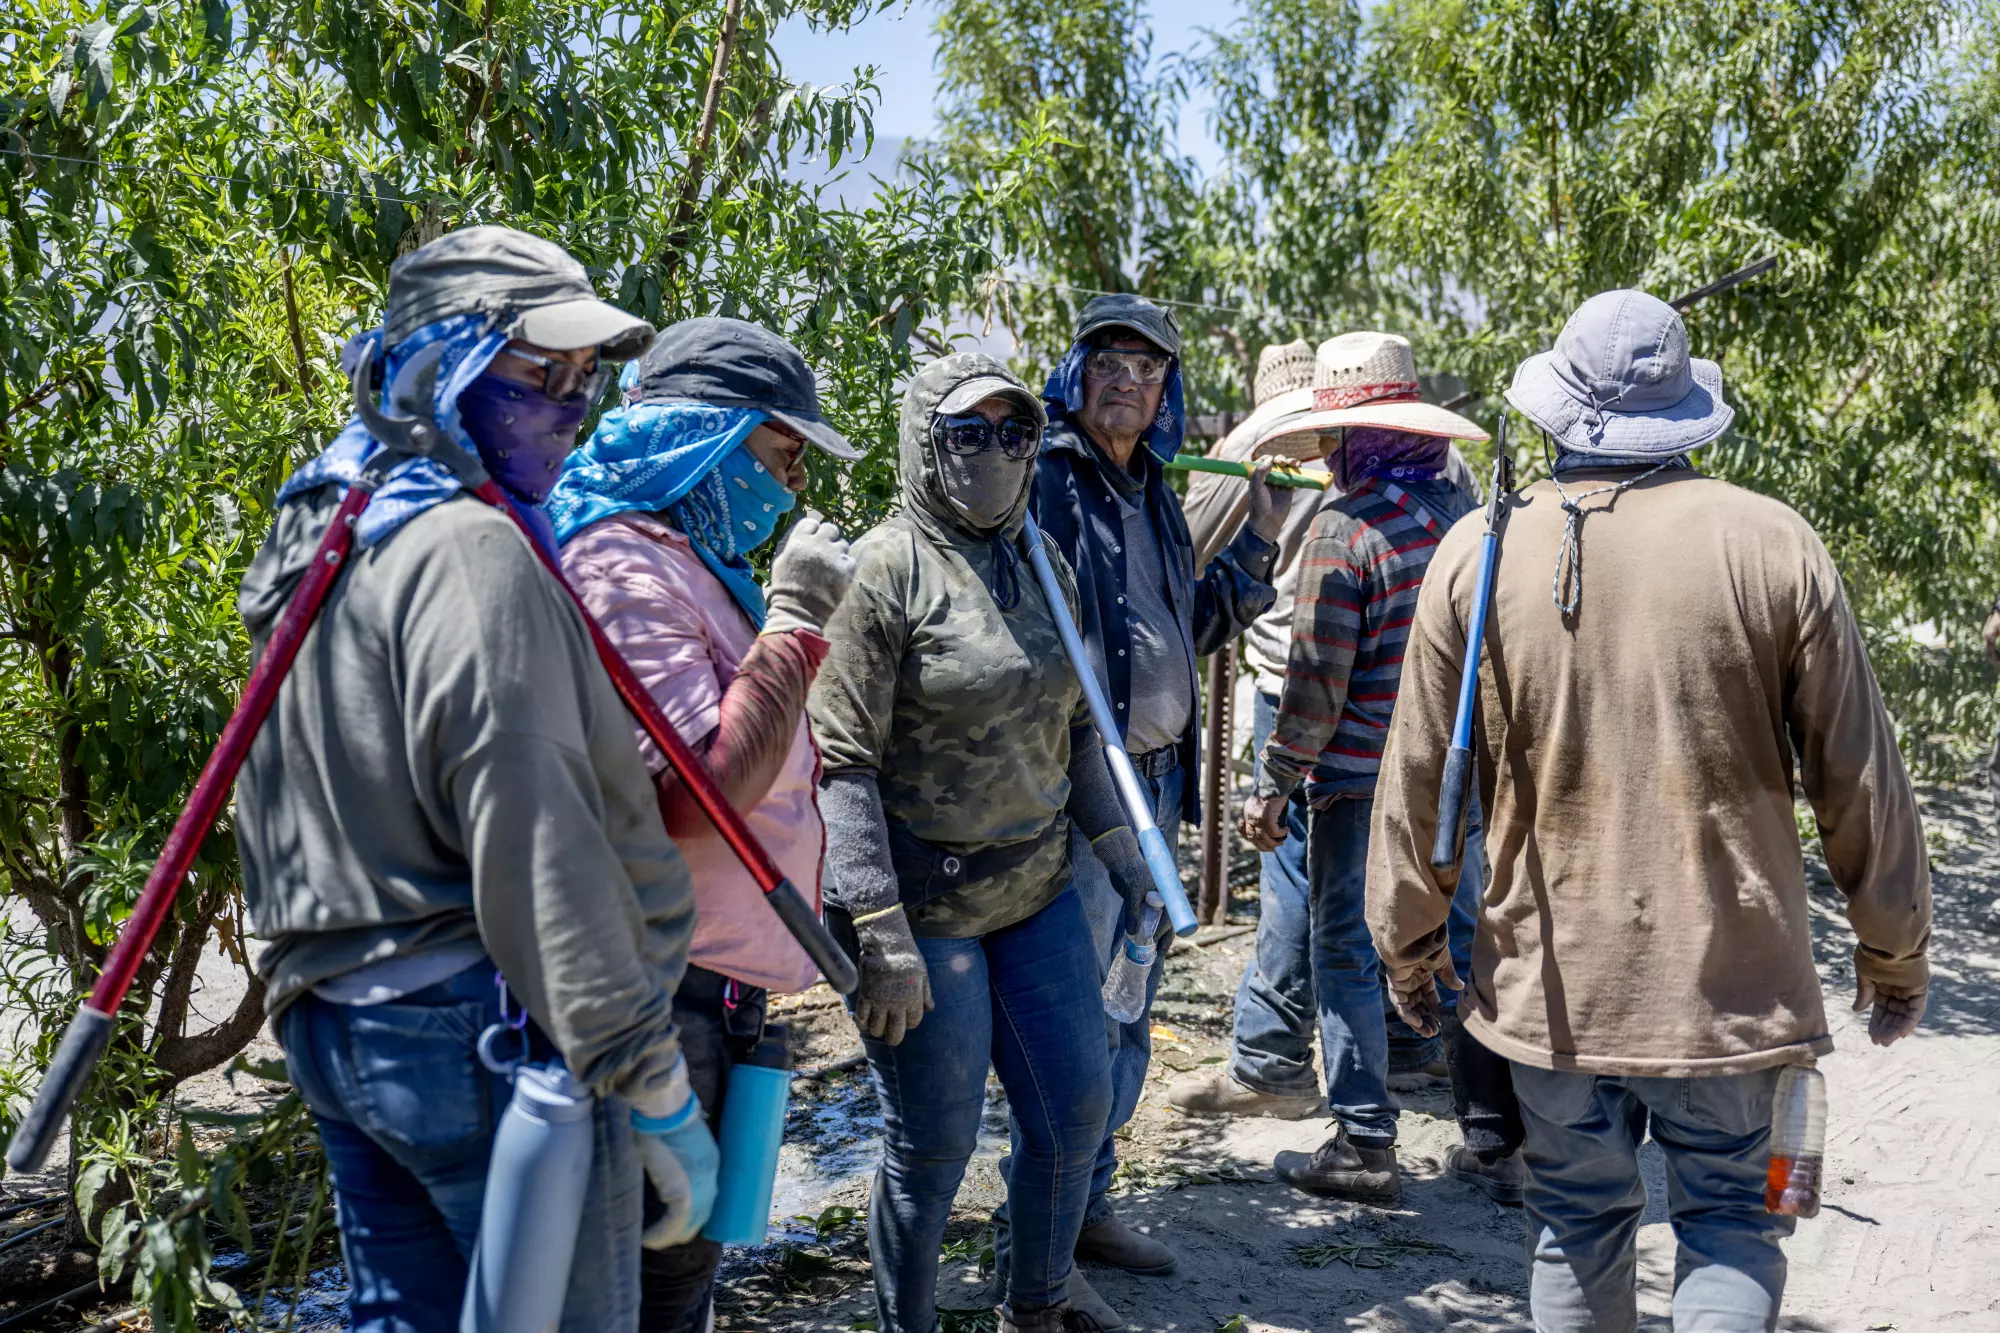 A group of 7 farmworkers in the field holding cutting tools.